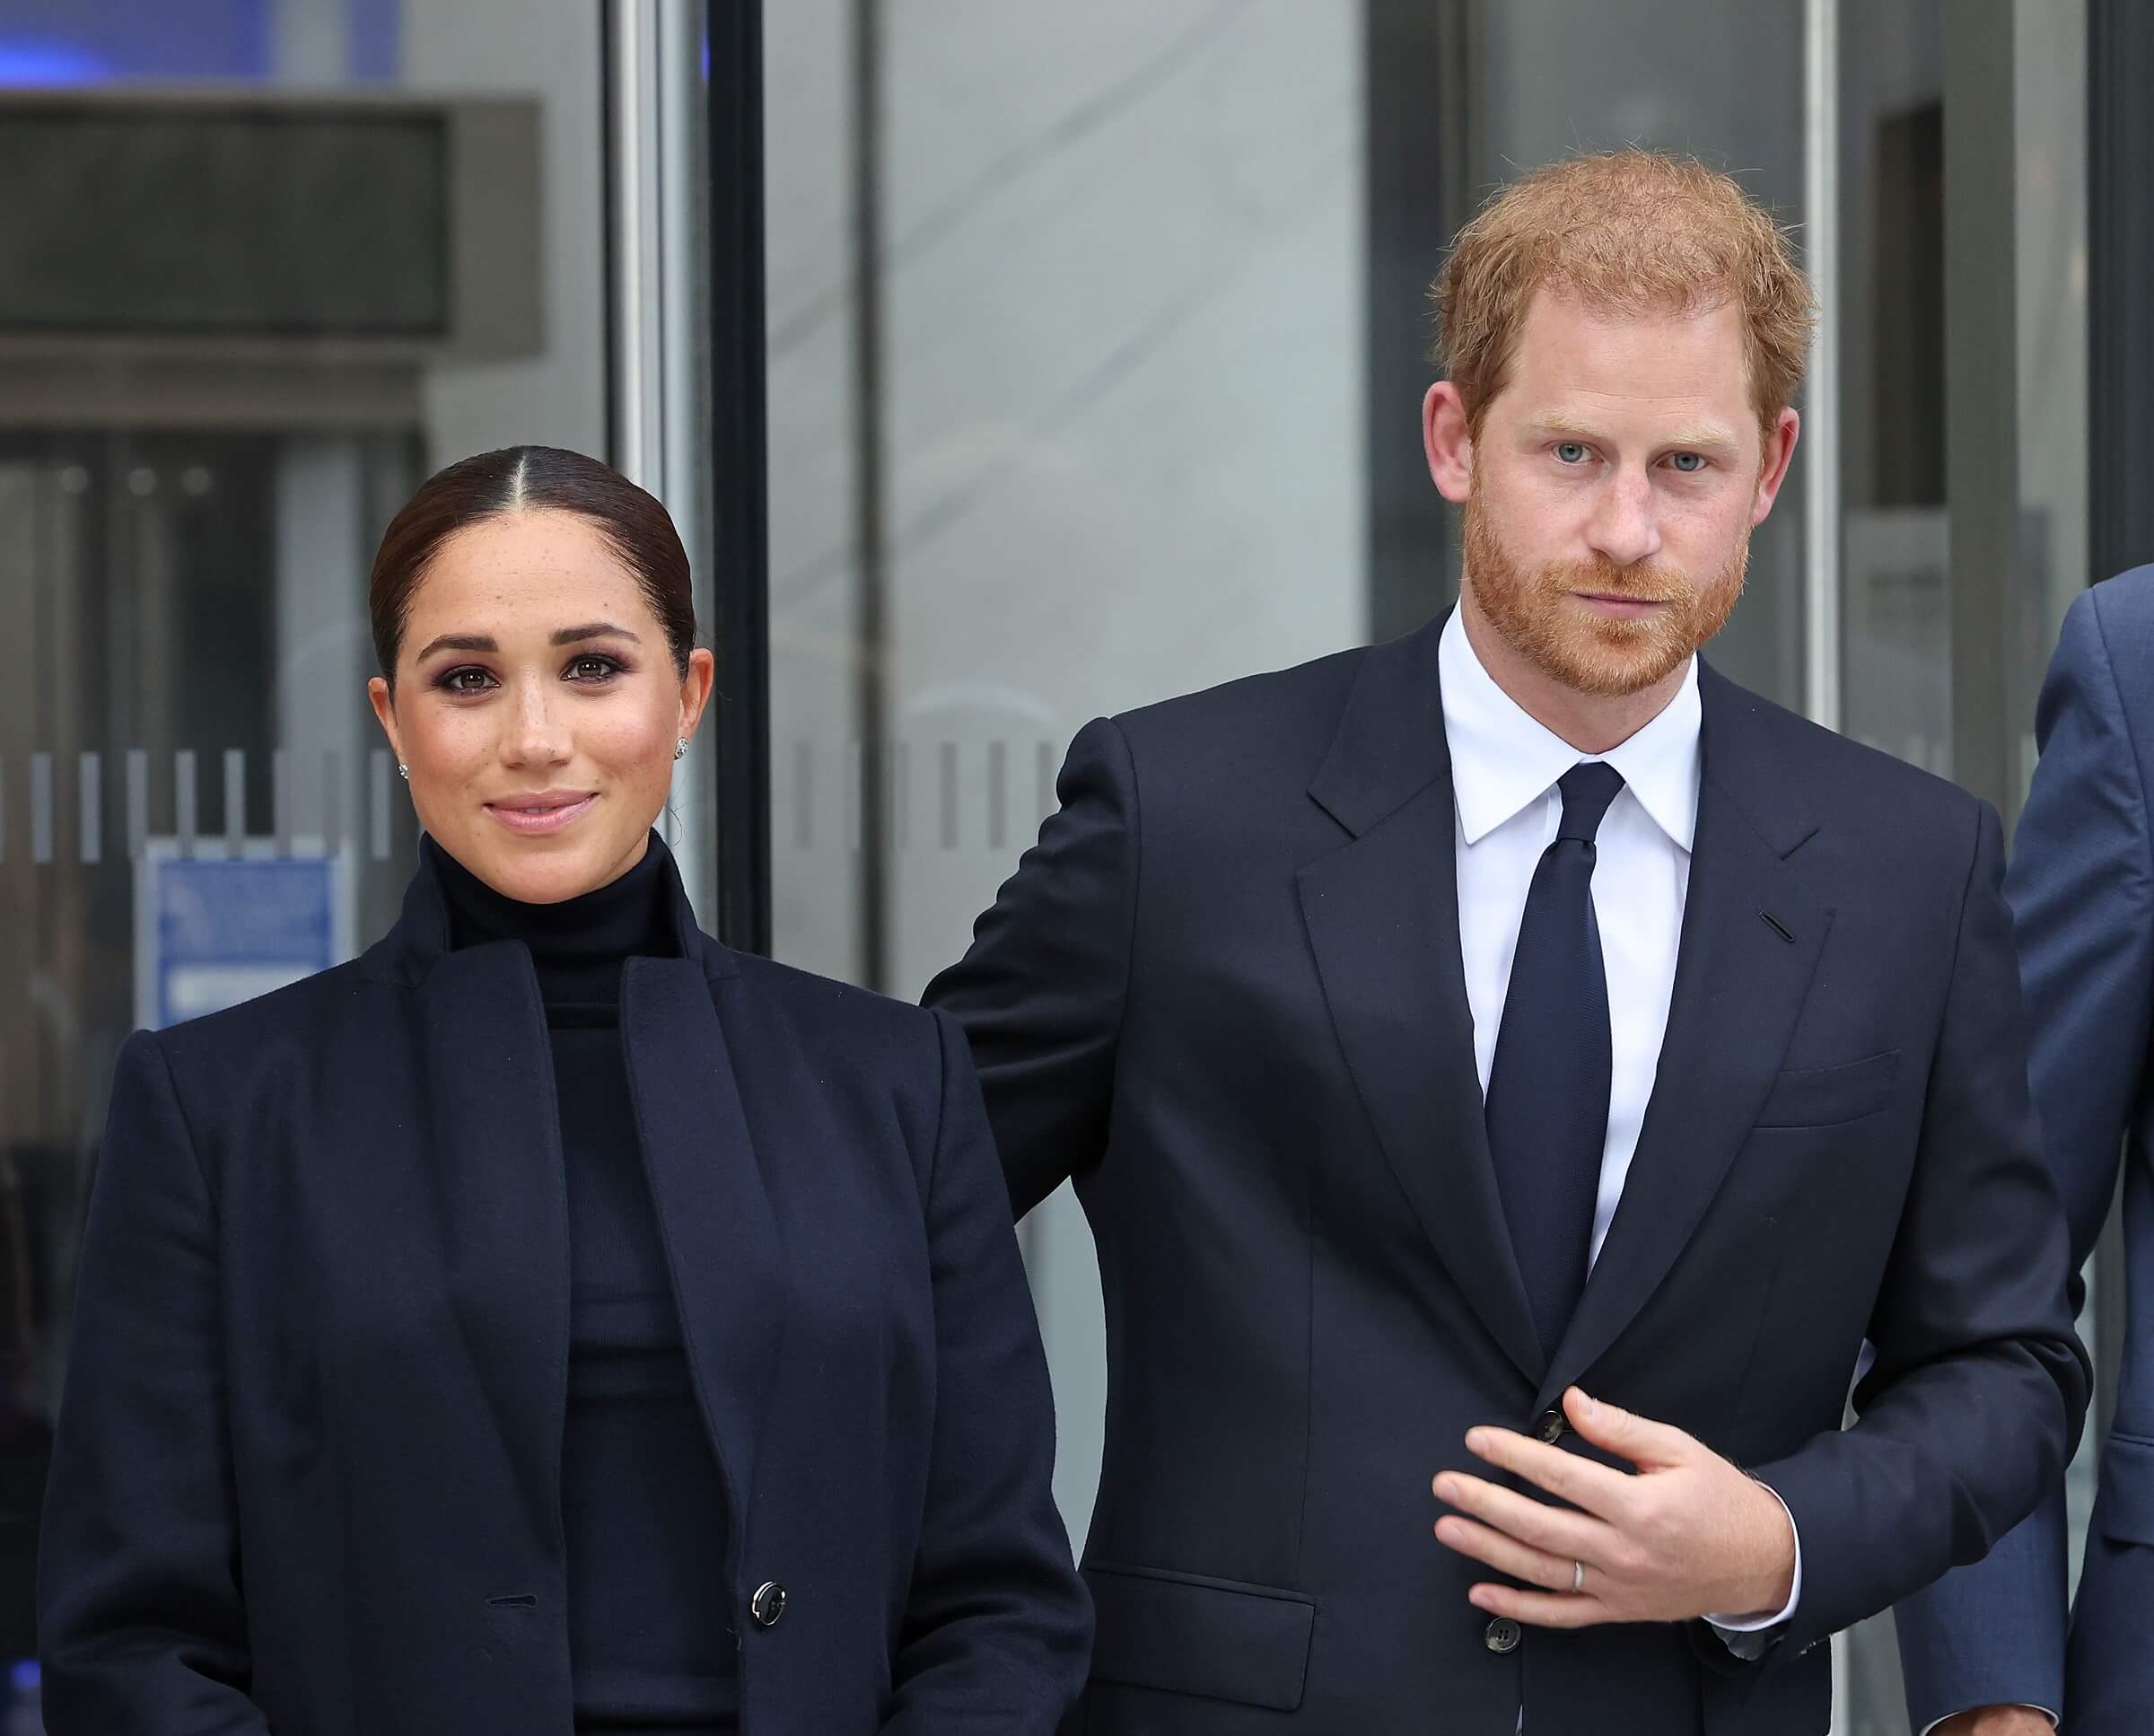 Meghan Markle and Prince Harry visit One World Observatory in New York City